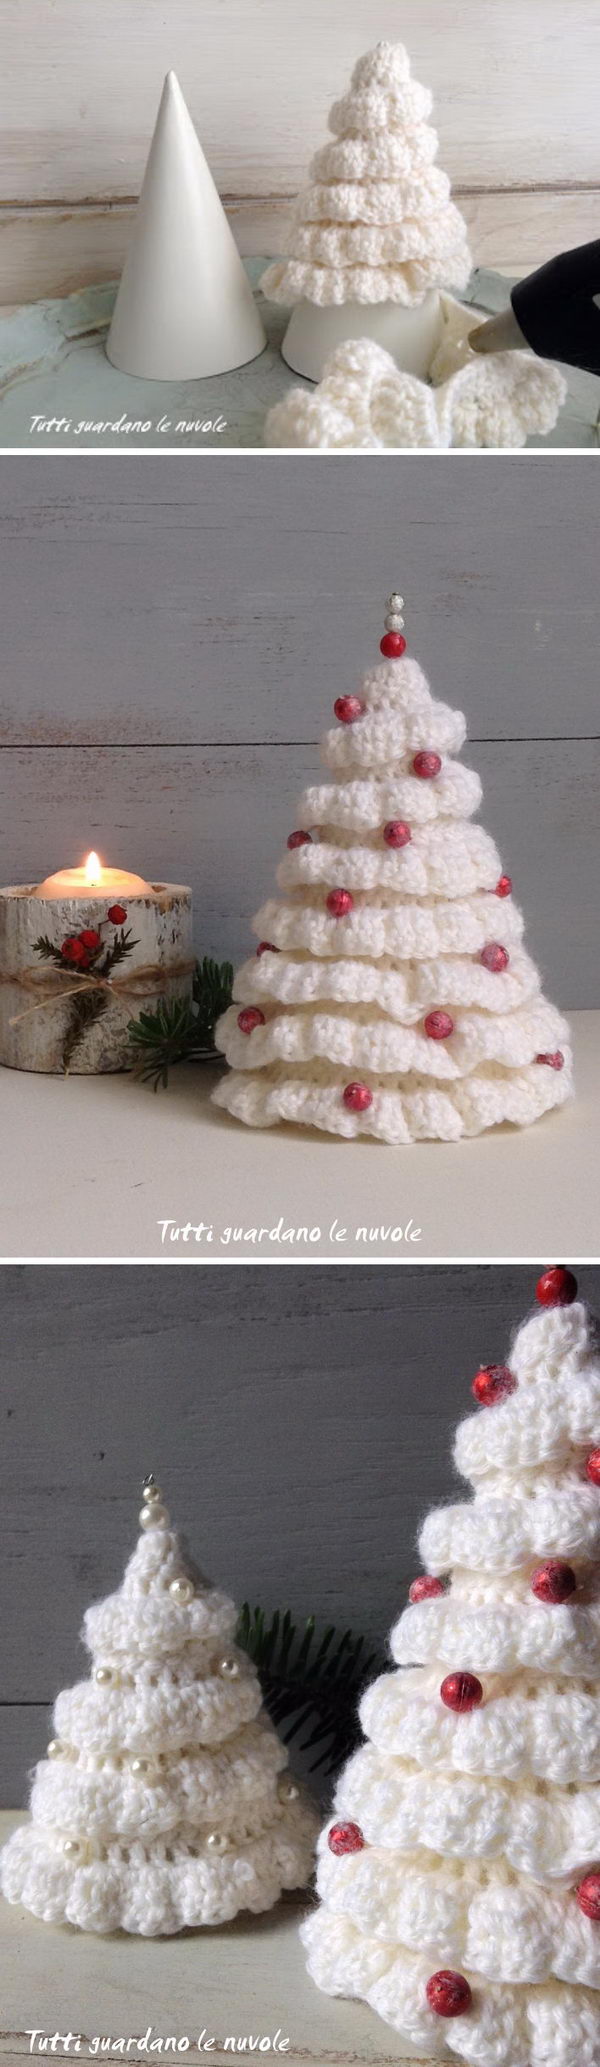 25+ Free Christmas Crochet Patterns For Beginners - Hative